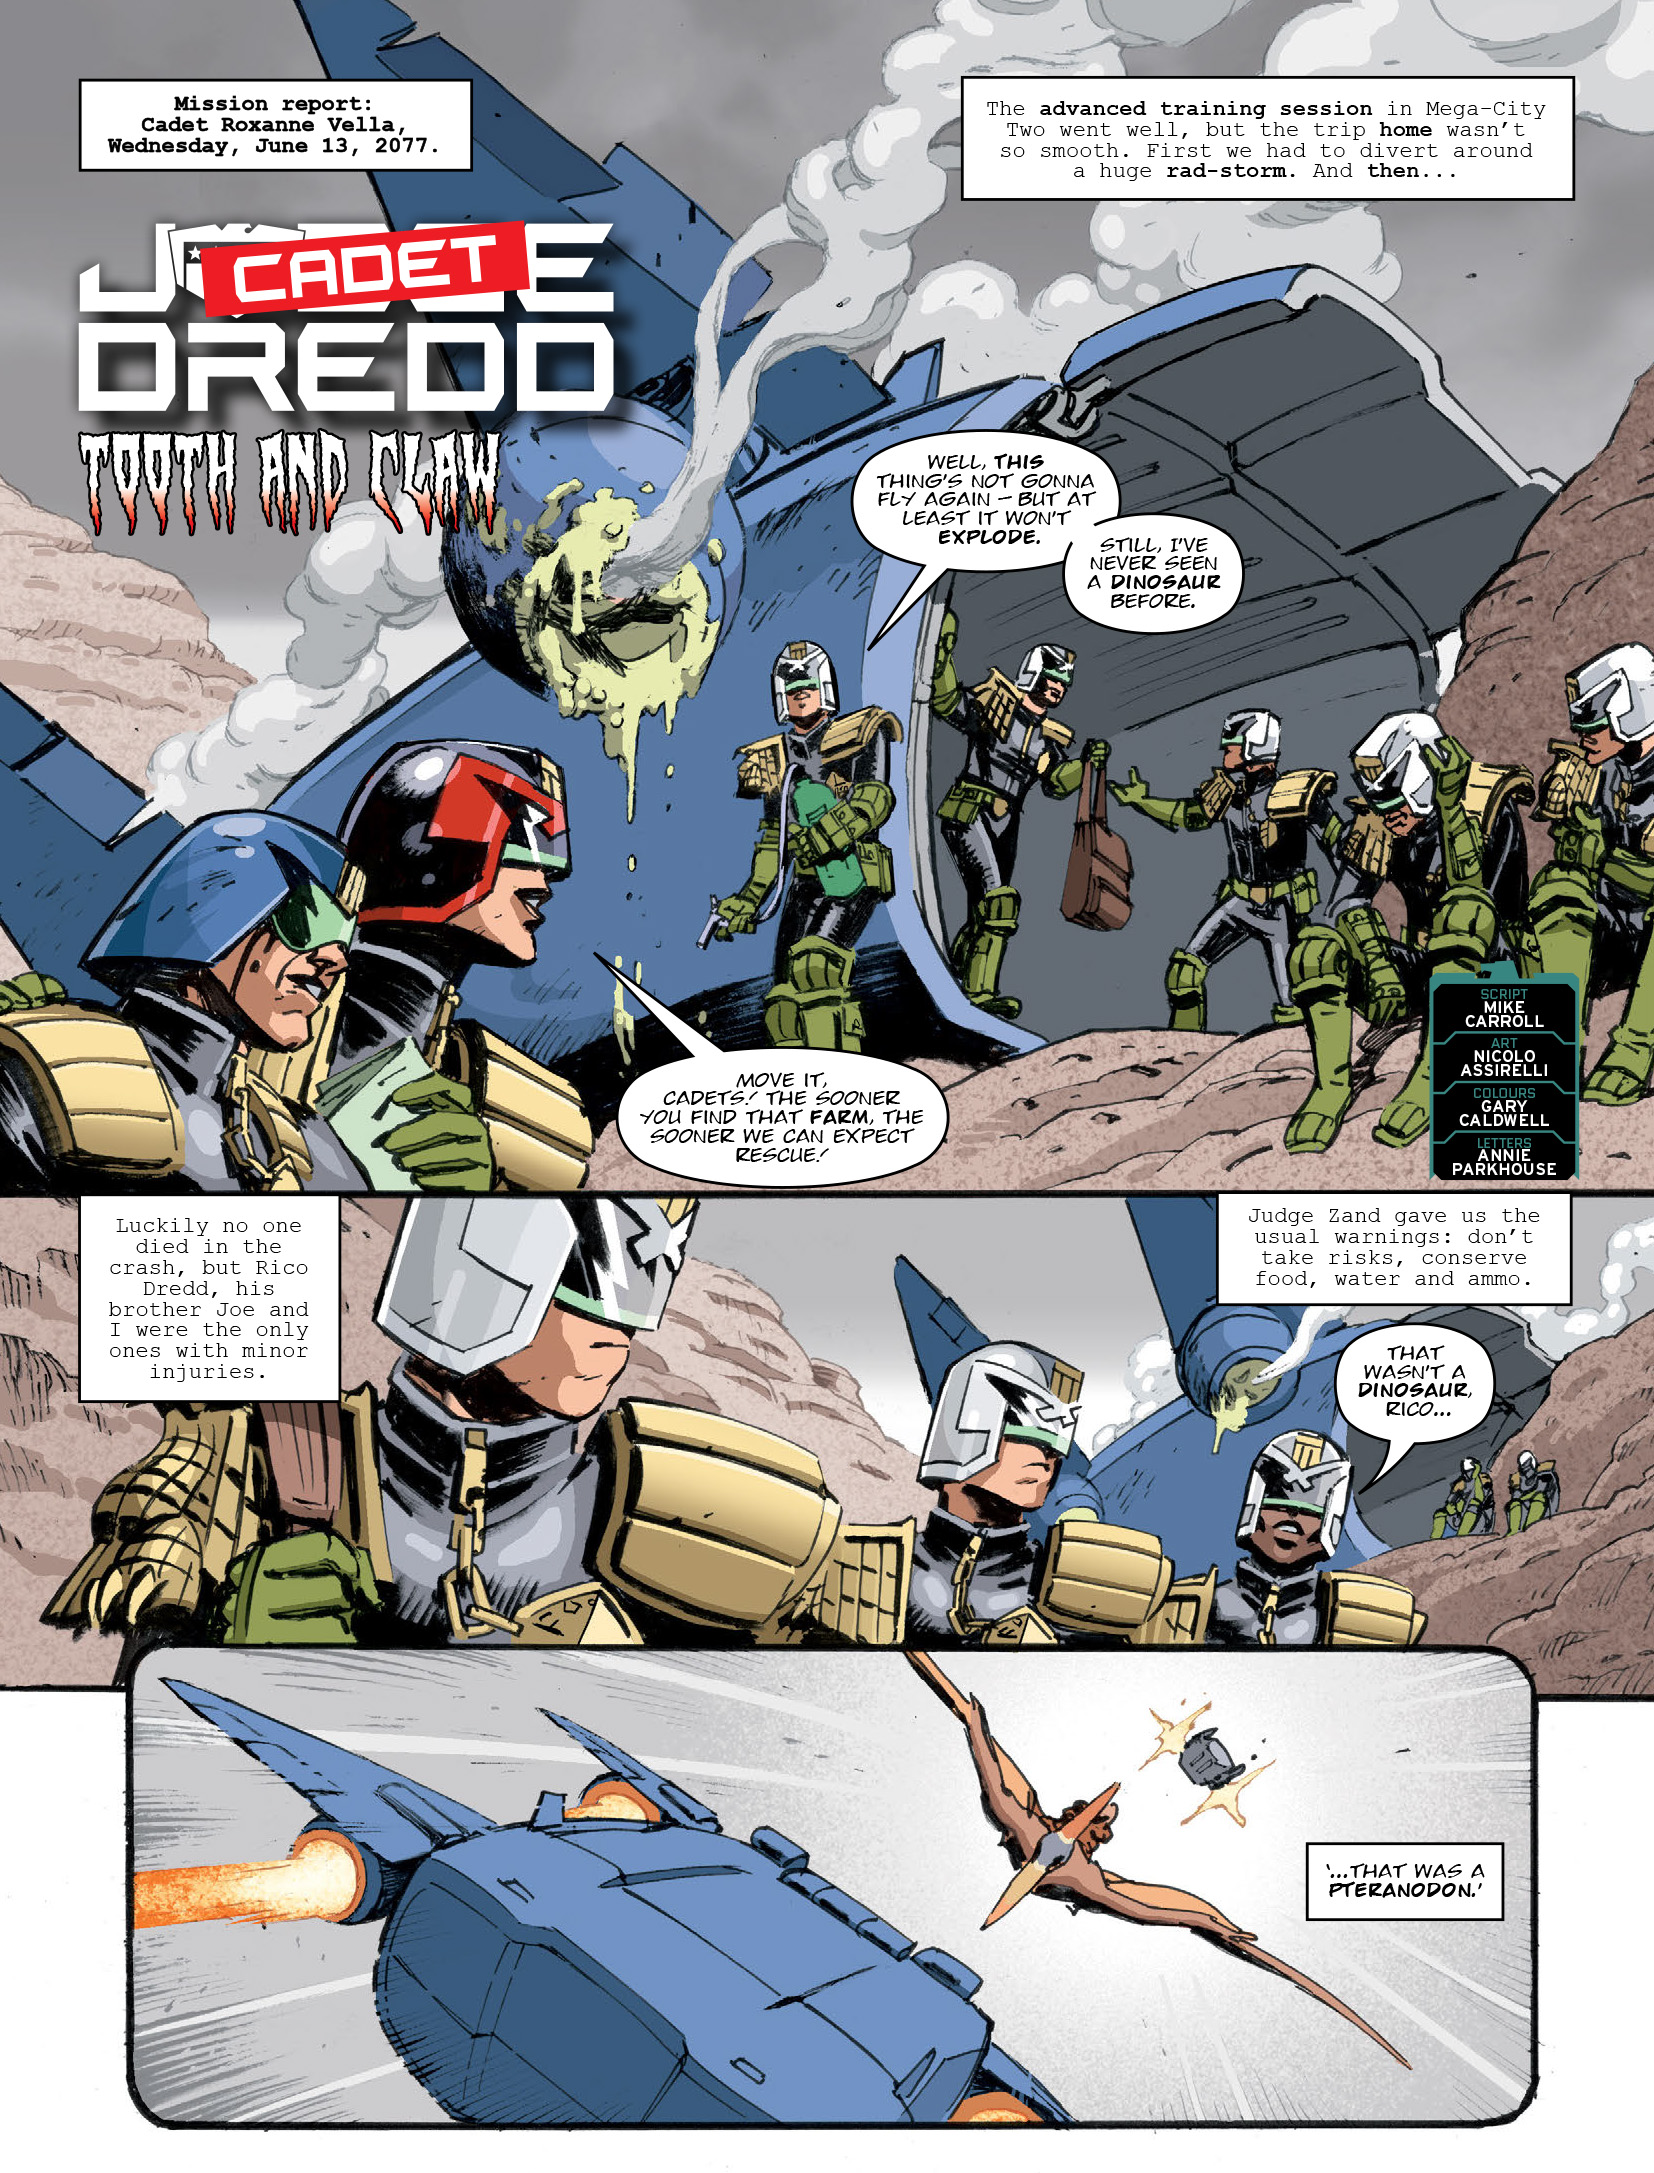 2000 AD: Chapter 2206 - Page 3